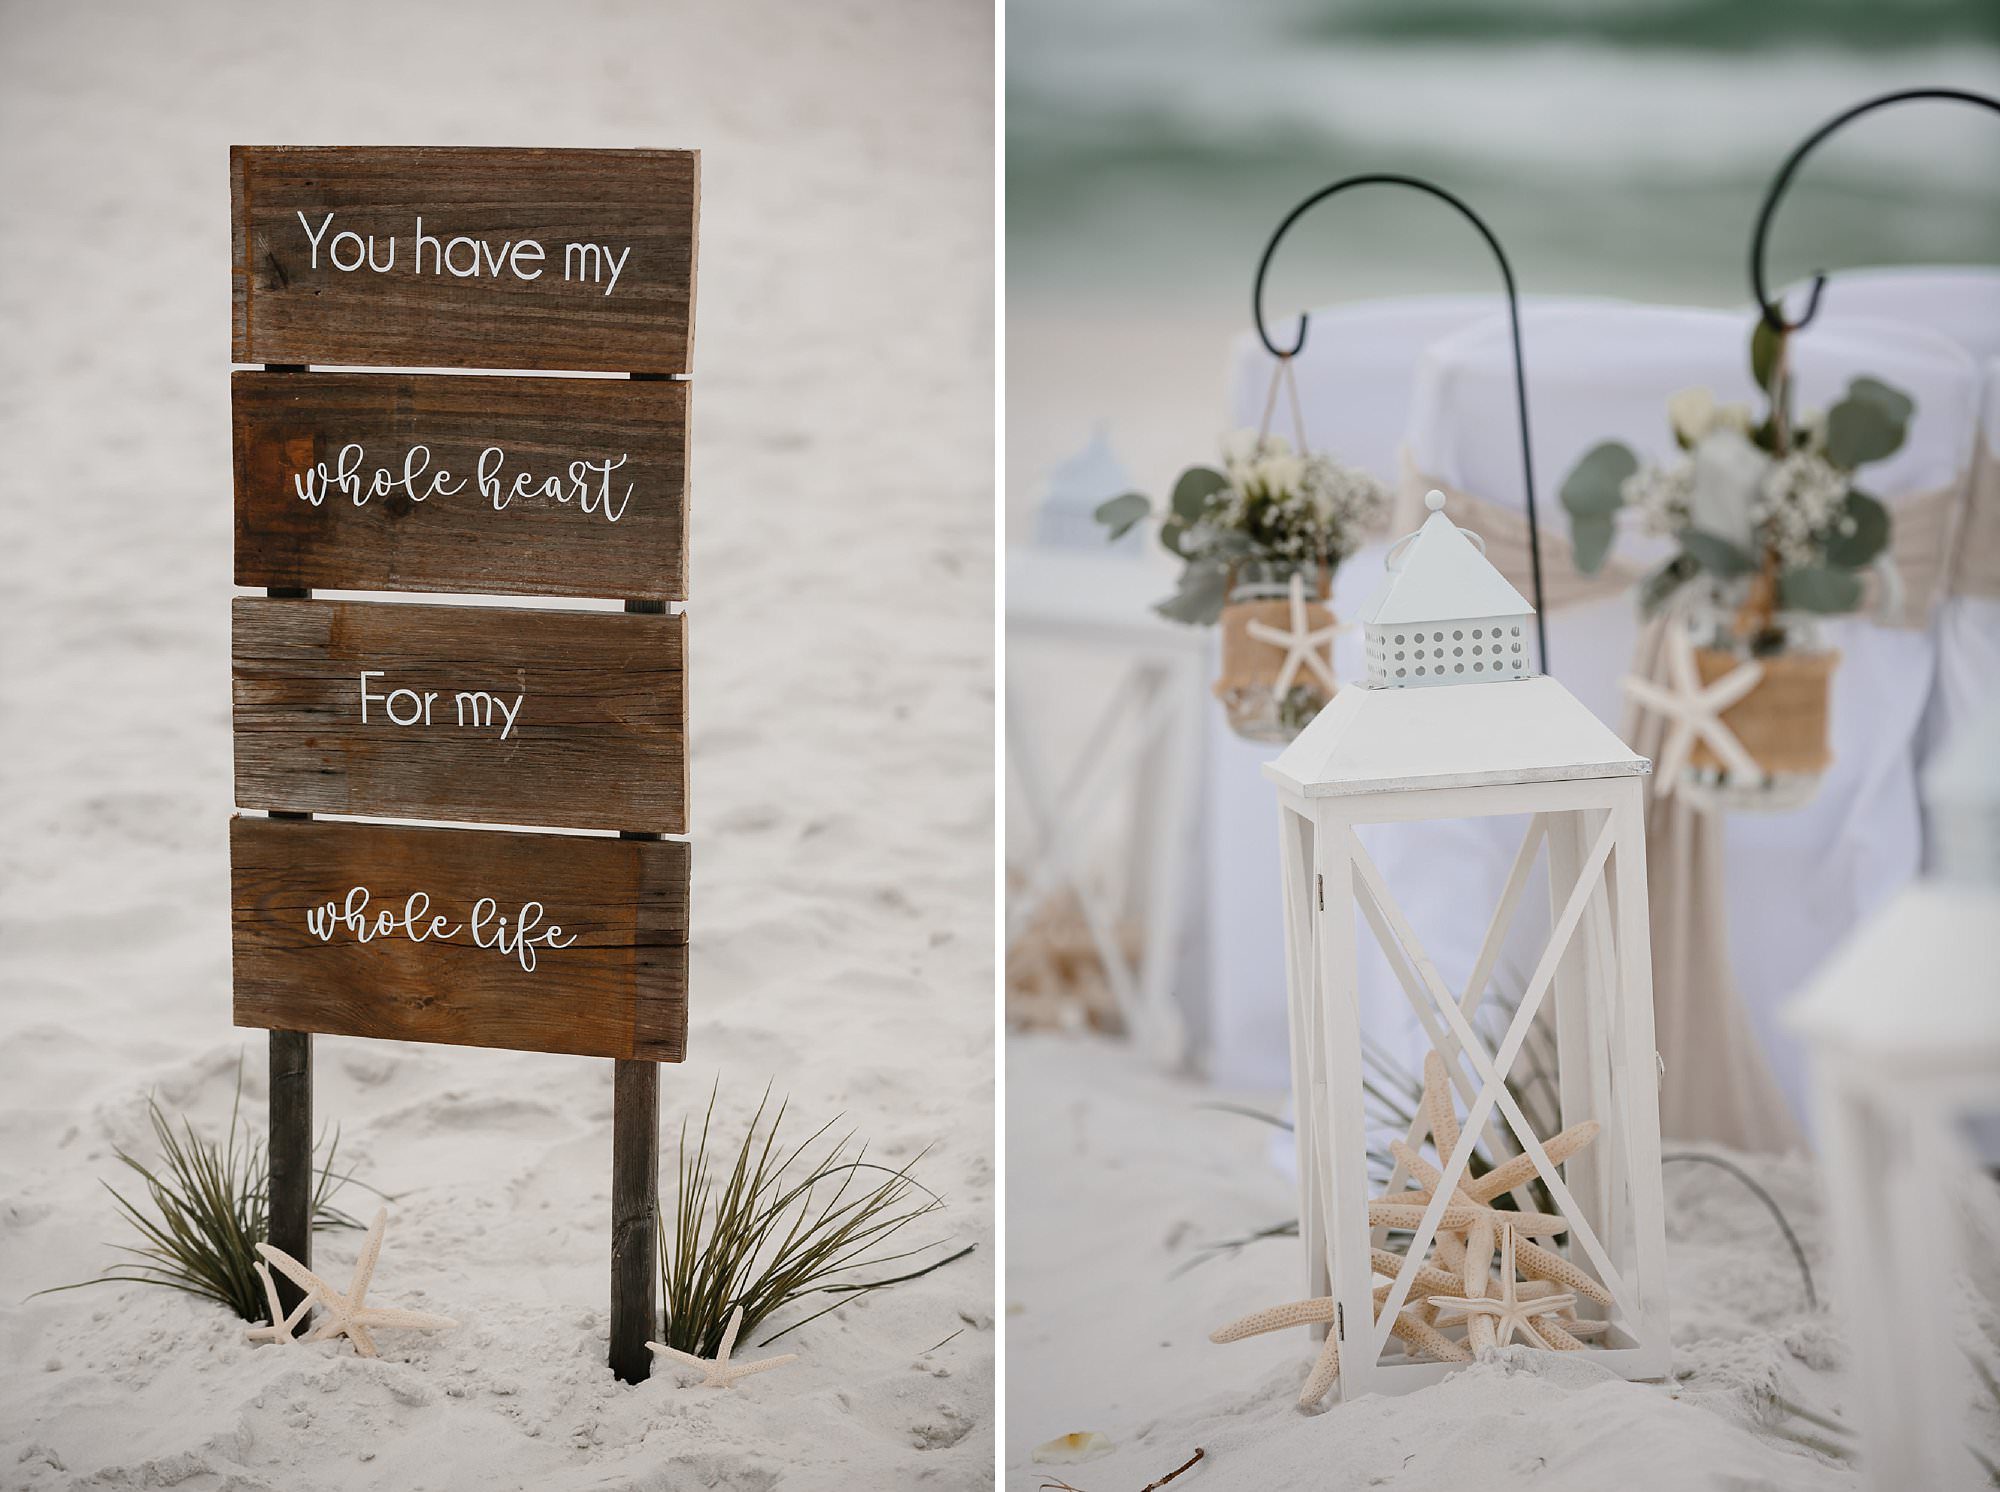 Wooden beach wedding sign and shepard hooks with rose and eucalyptus filled mason jars with white lanterns and starfish